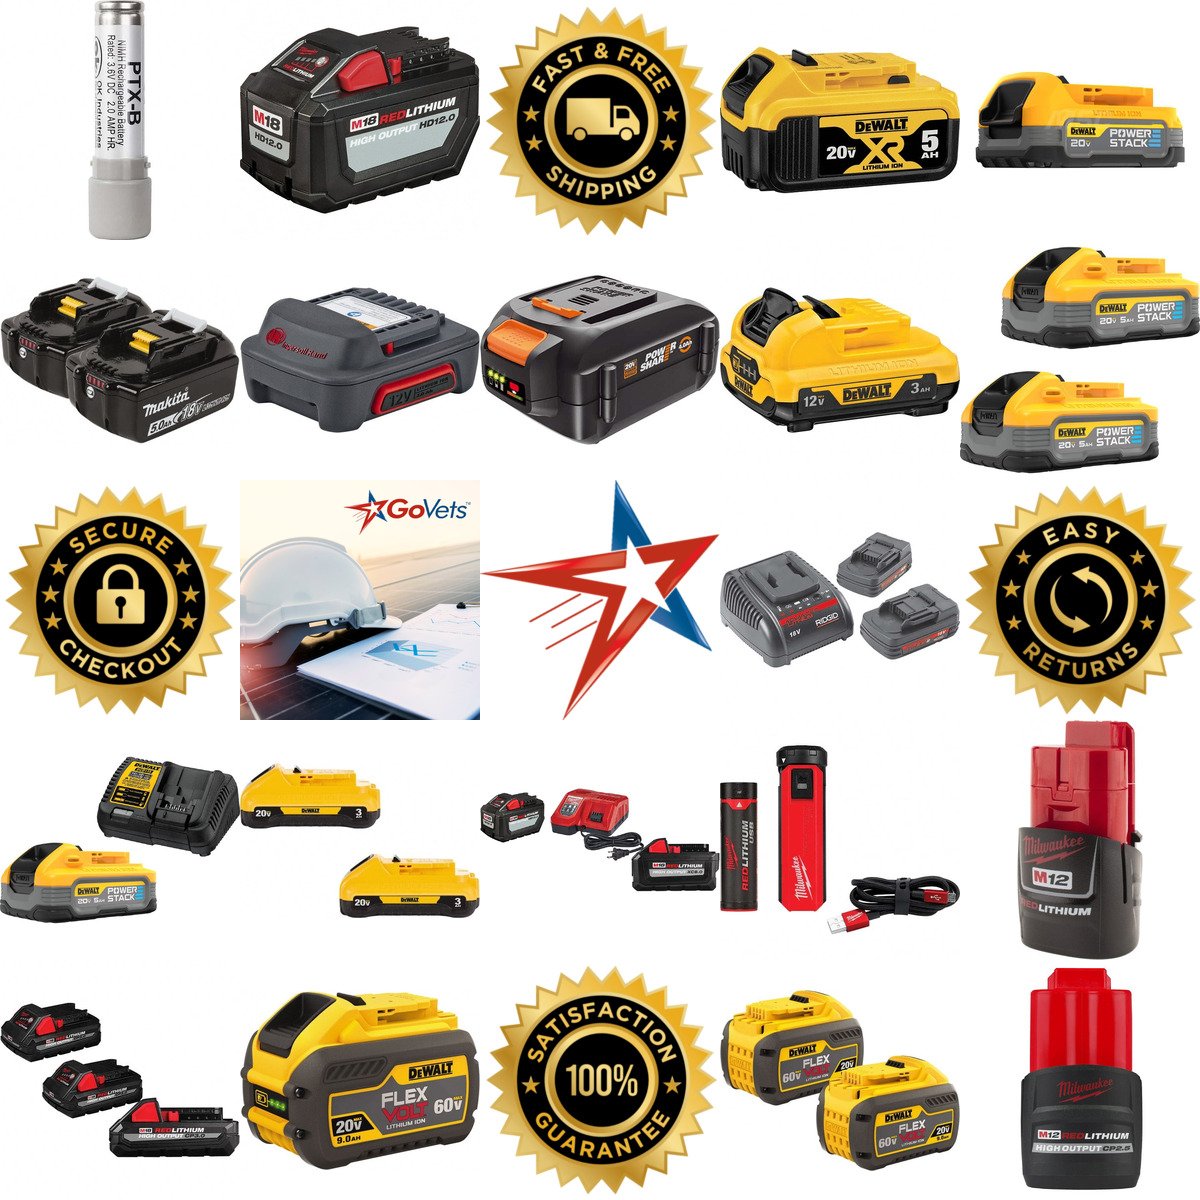 A selection of Power Tool Batteries products on GoVets